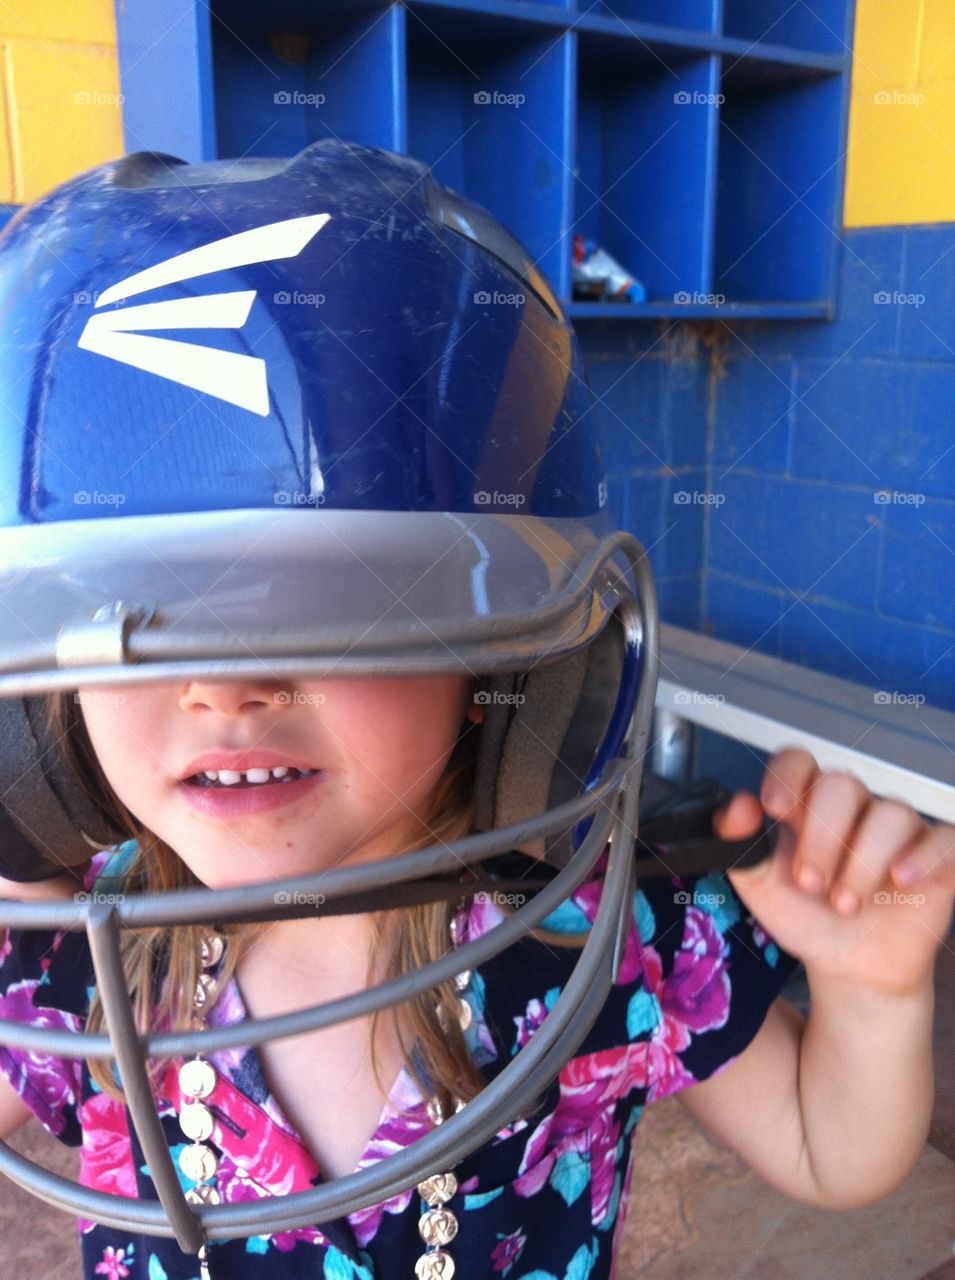 future pro softball player. she is 3 and attended our travel softball practice where she got busy trying on gear.